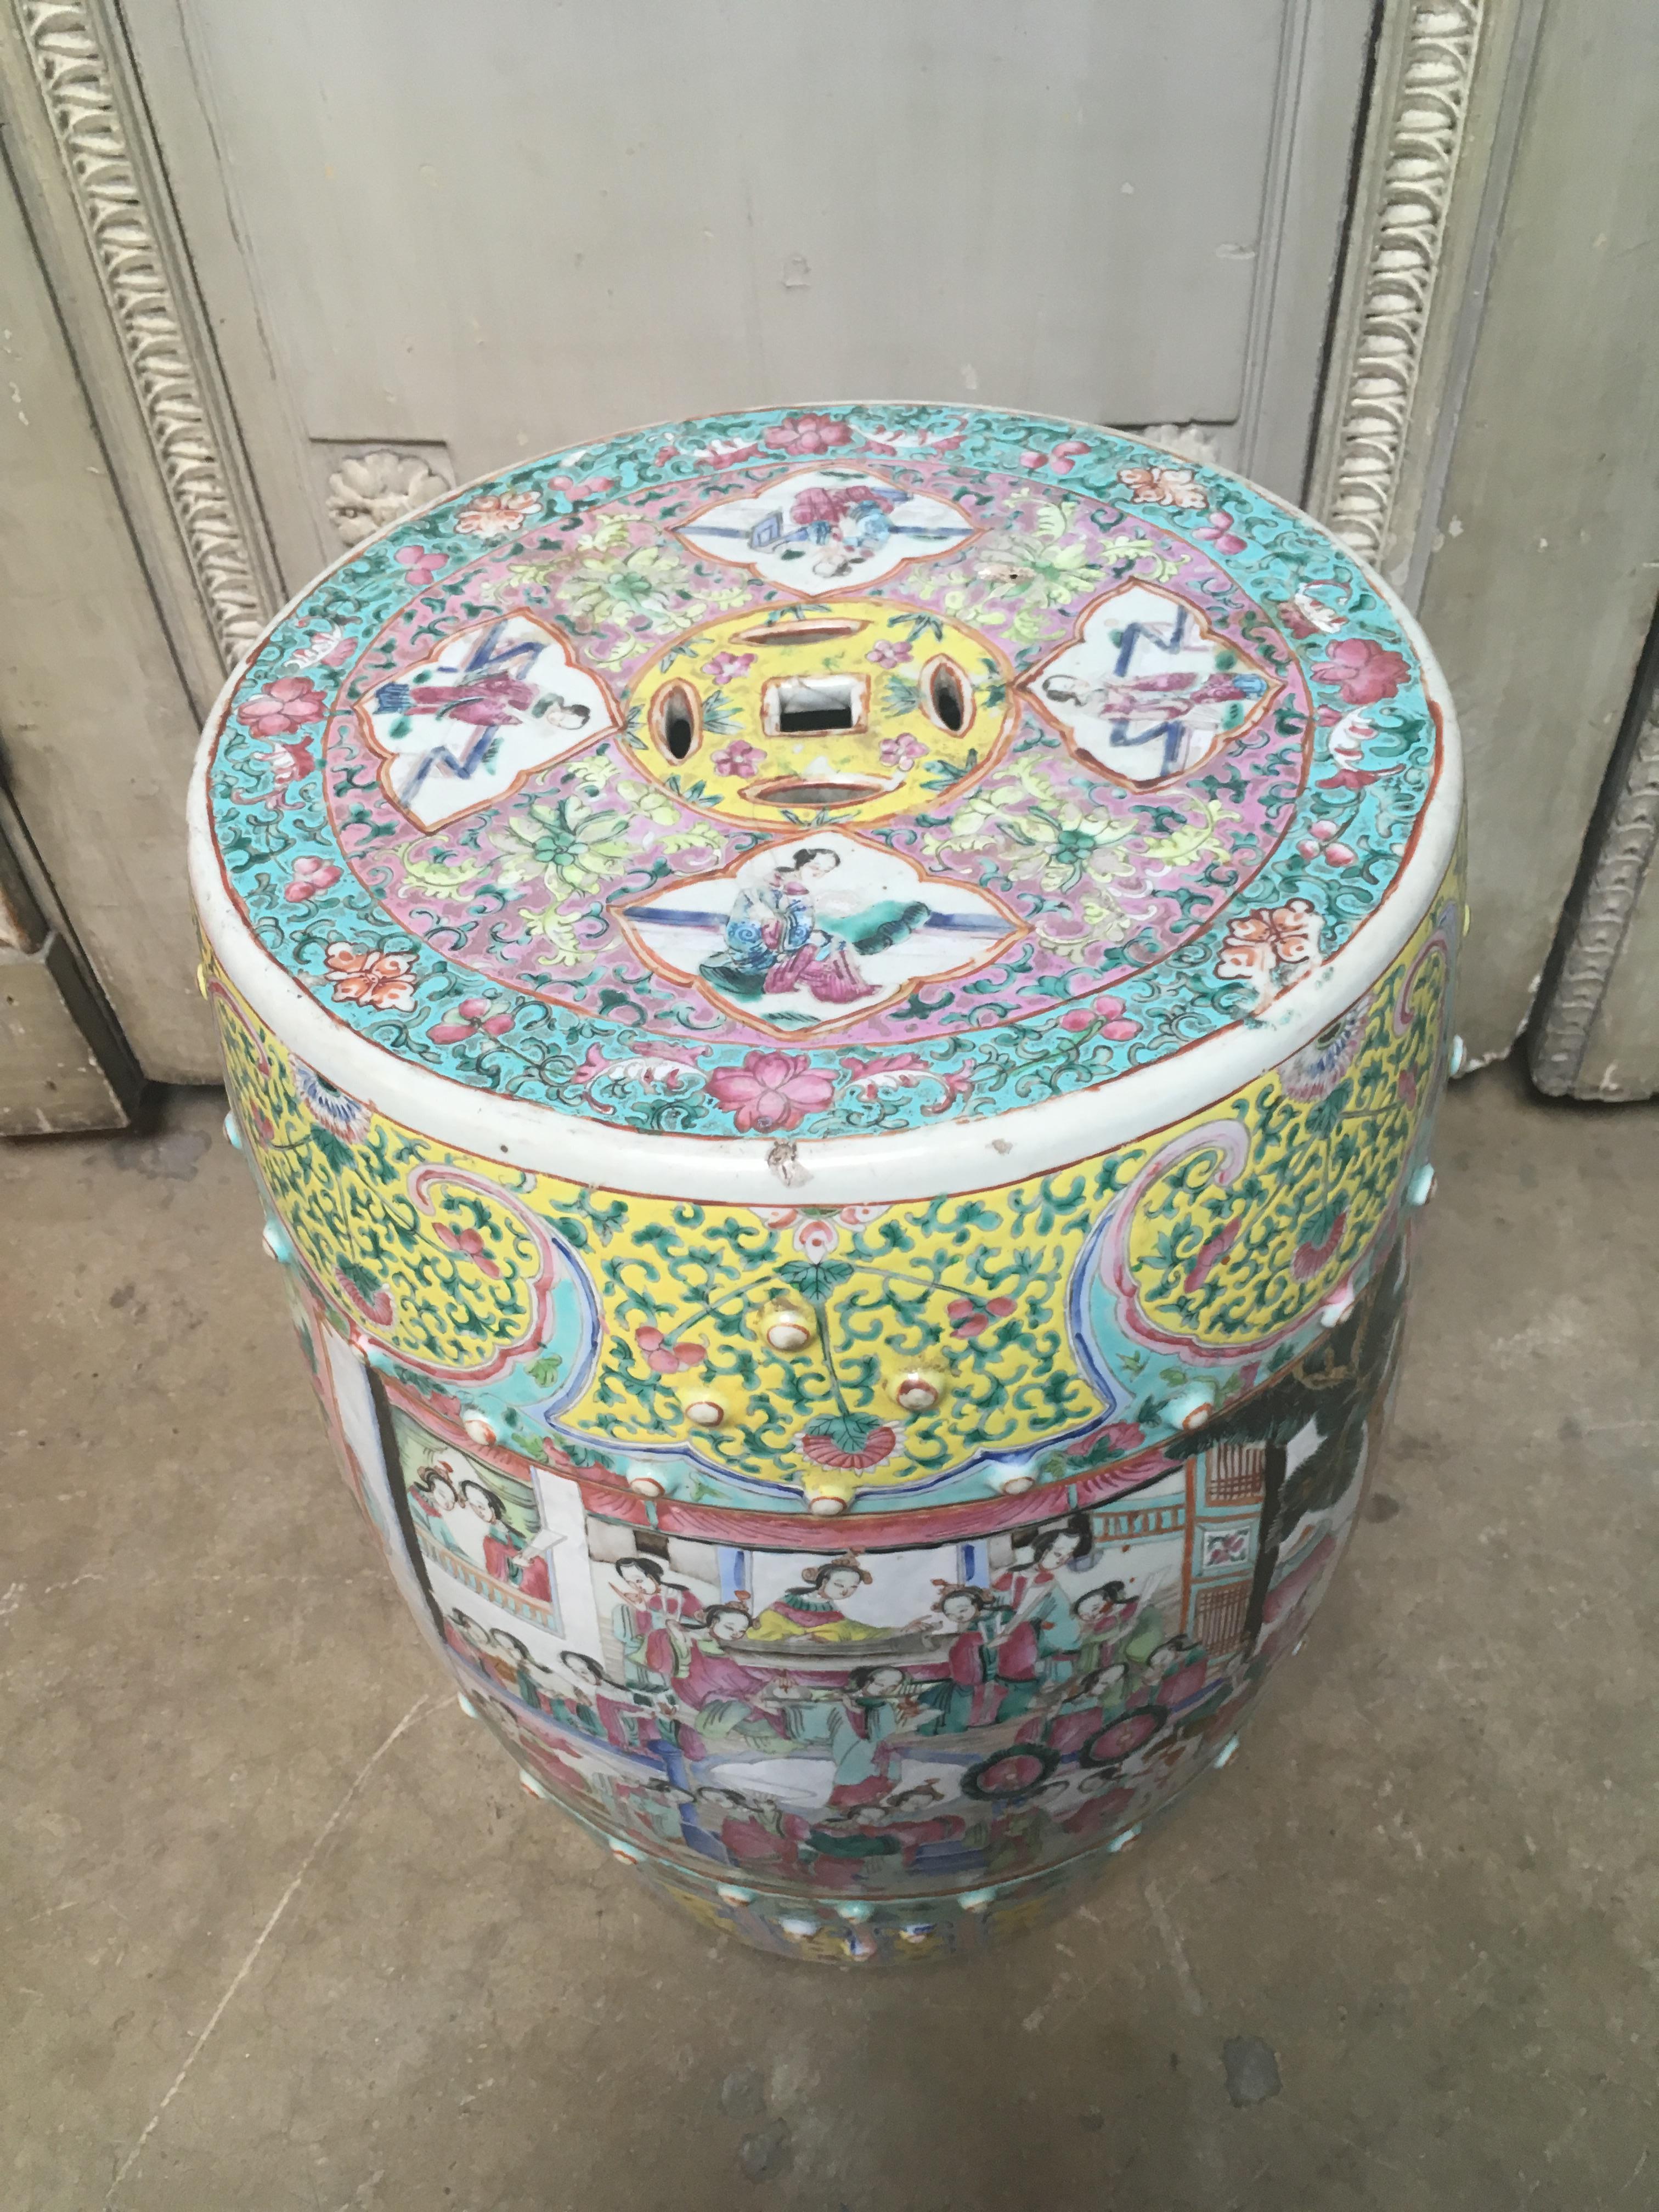 A 19th century Chinese famille rose porcelain garden seat.
Decorated with images of court ladies playing musical instruments and blossoming flowers and foliage, glazed knobs above and below. Yellow ground floral lappets decorate the top of the seat,